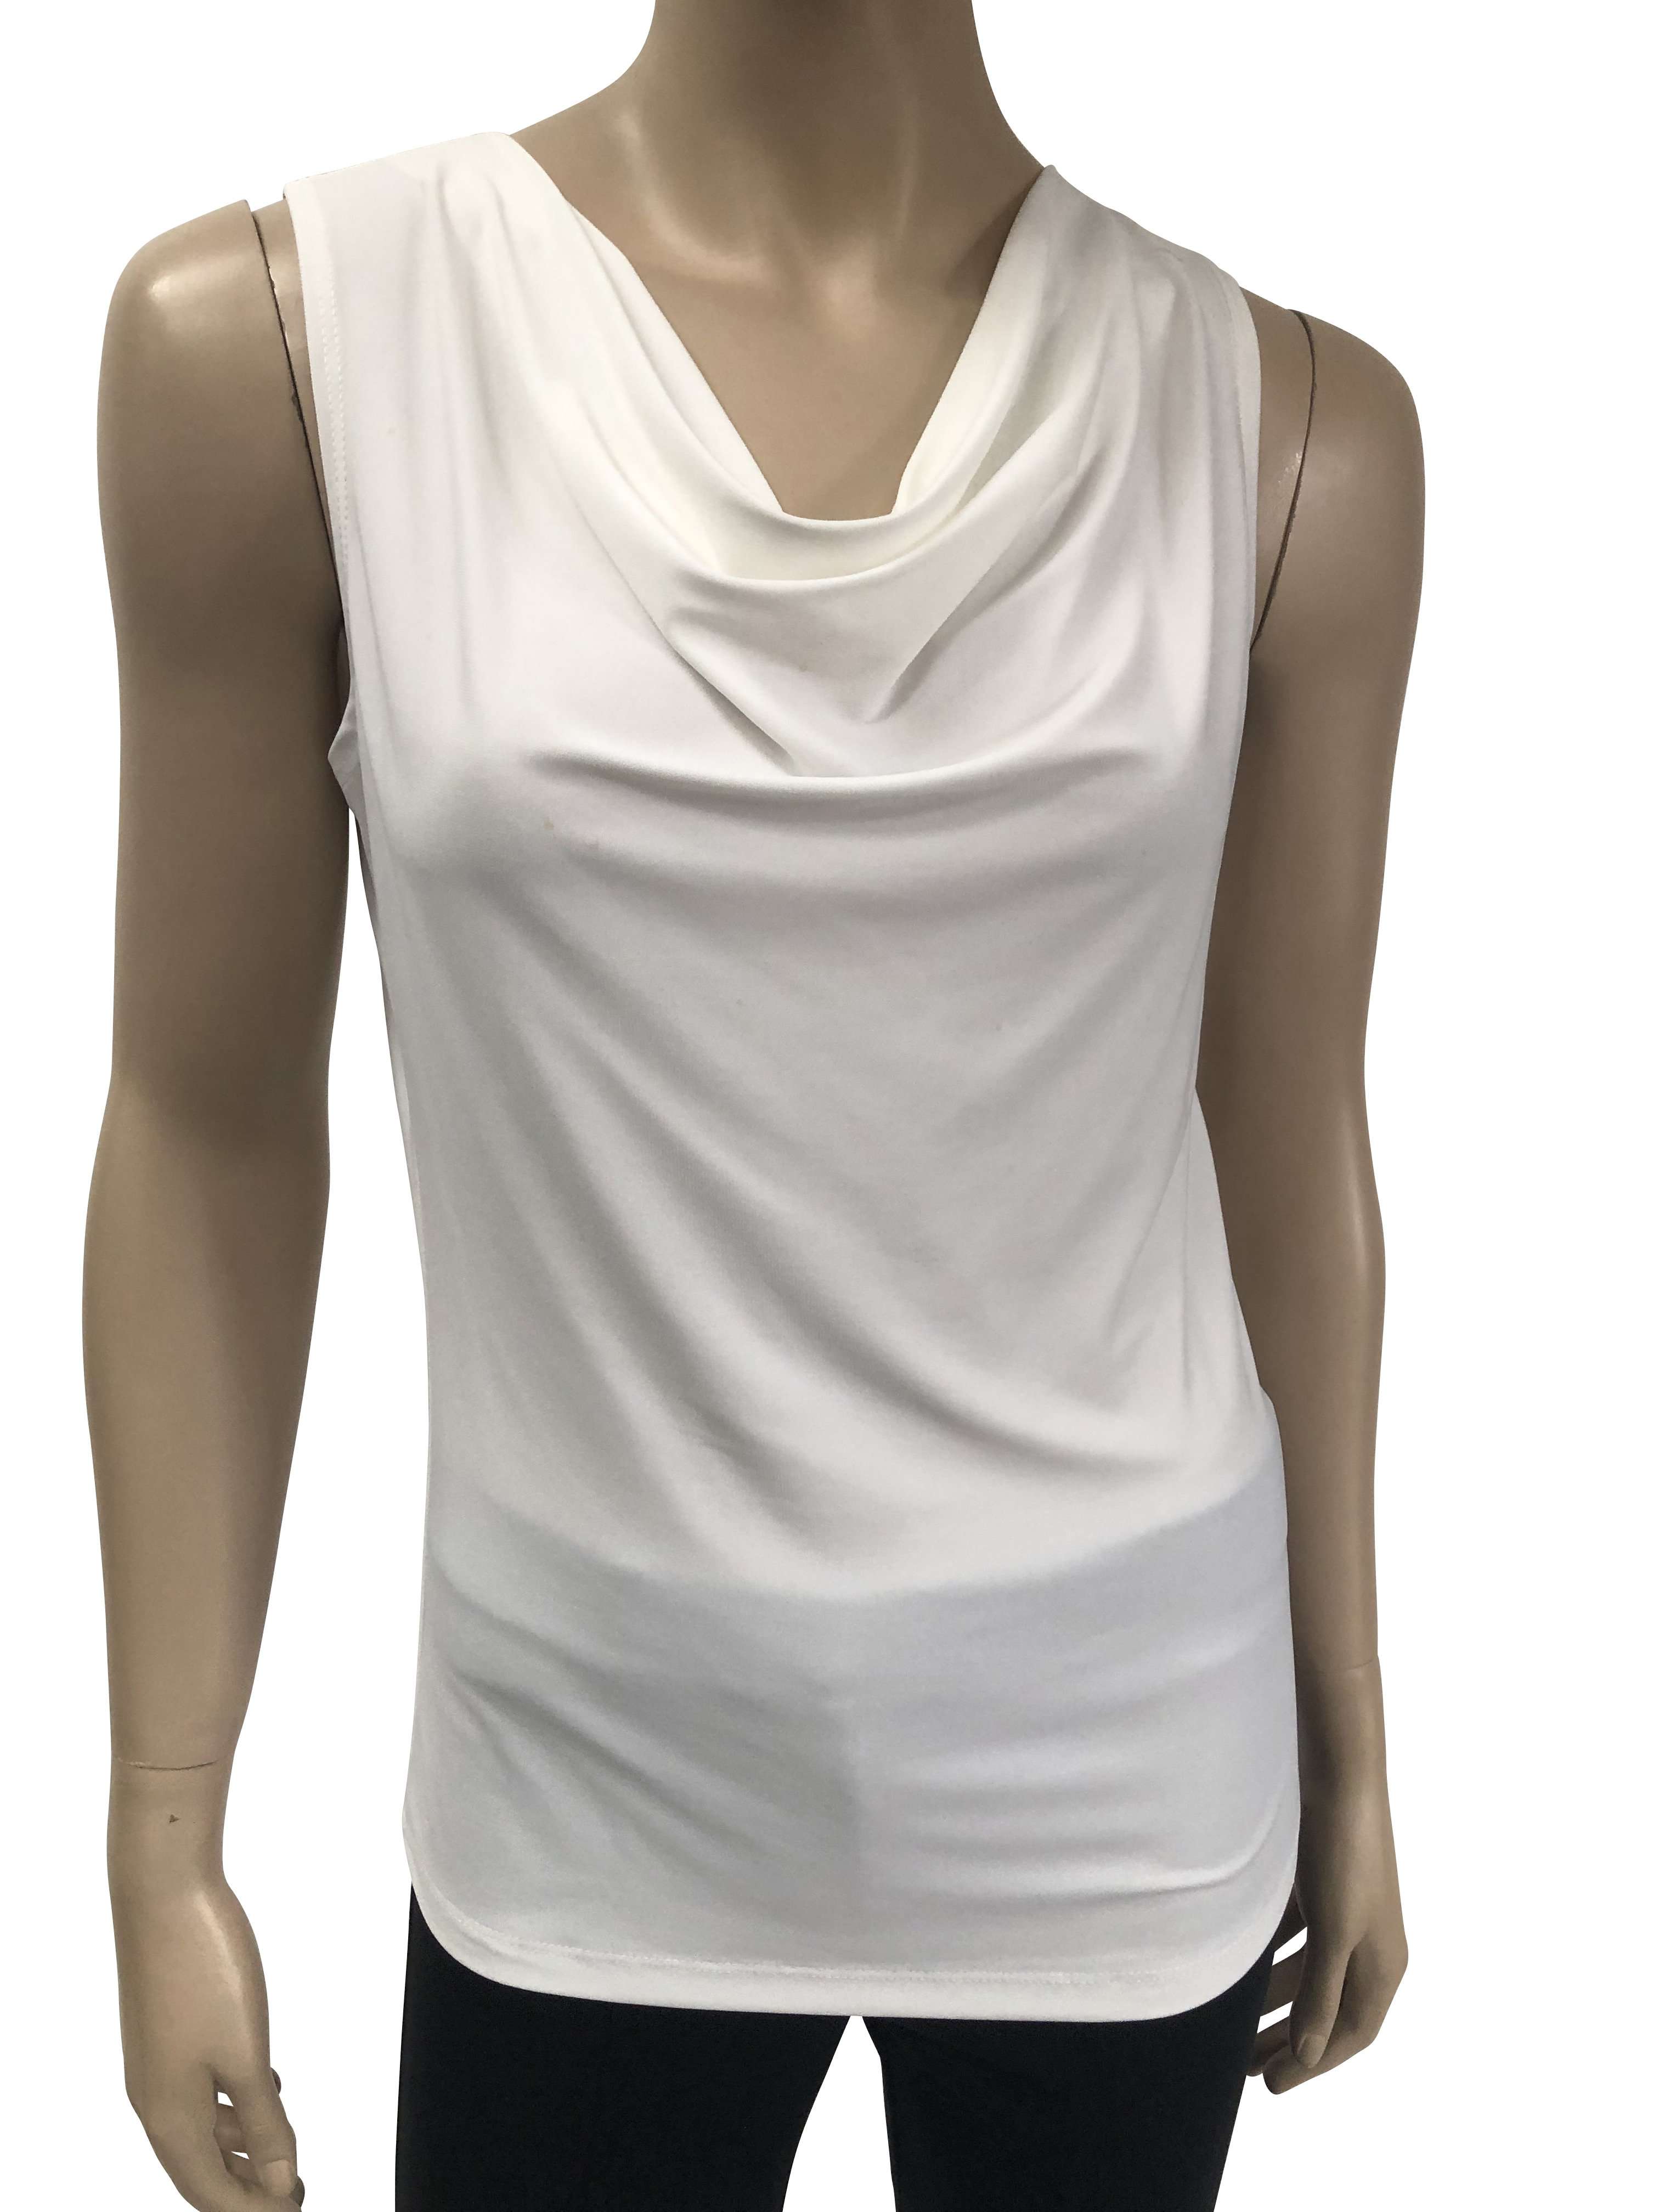 Women's Camisole Ivory Draped Neckline Quality Fabric and Fit - Made in Canada - Yvonne Marie - Yvonne Marie